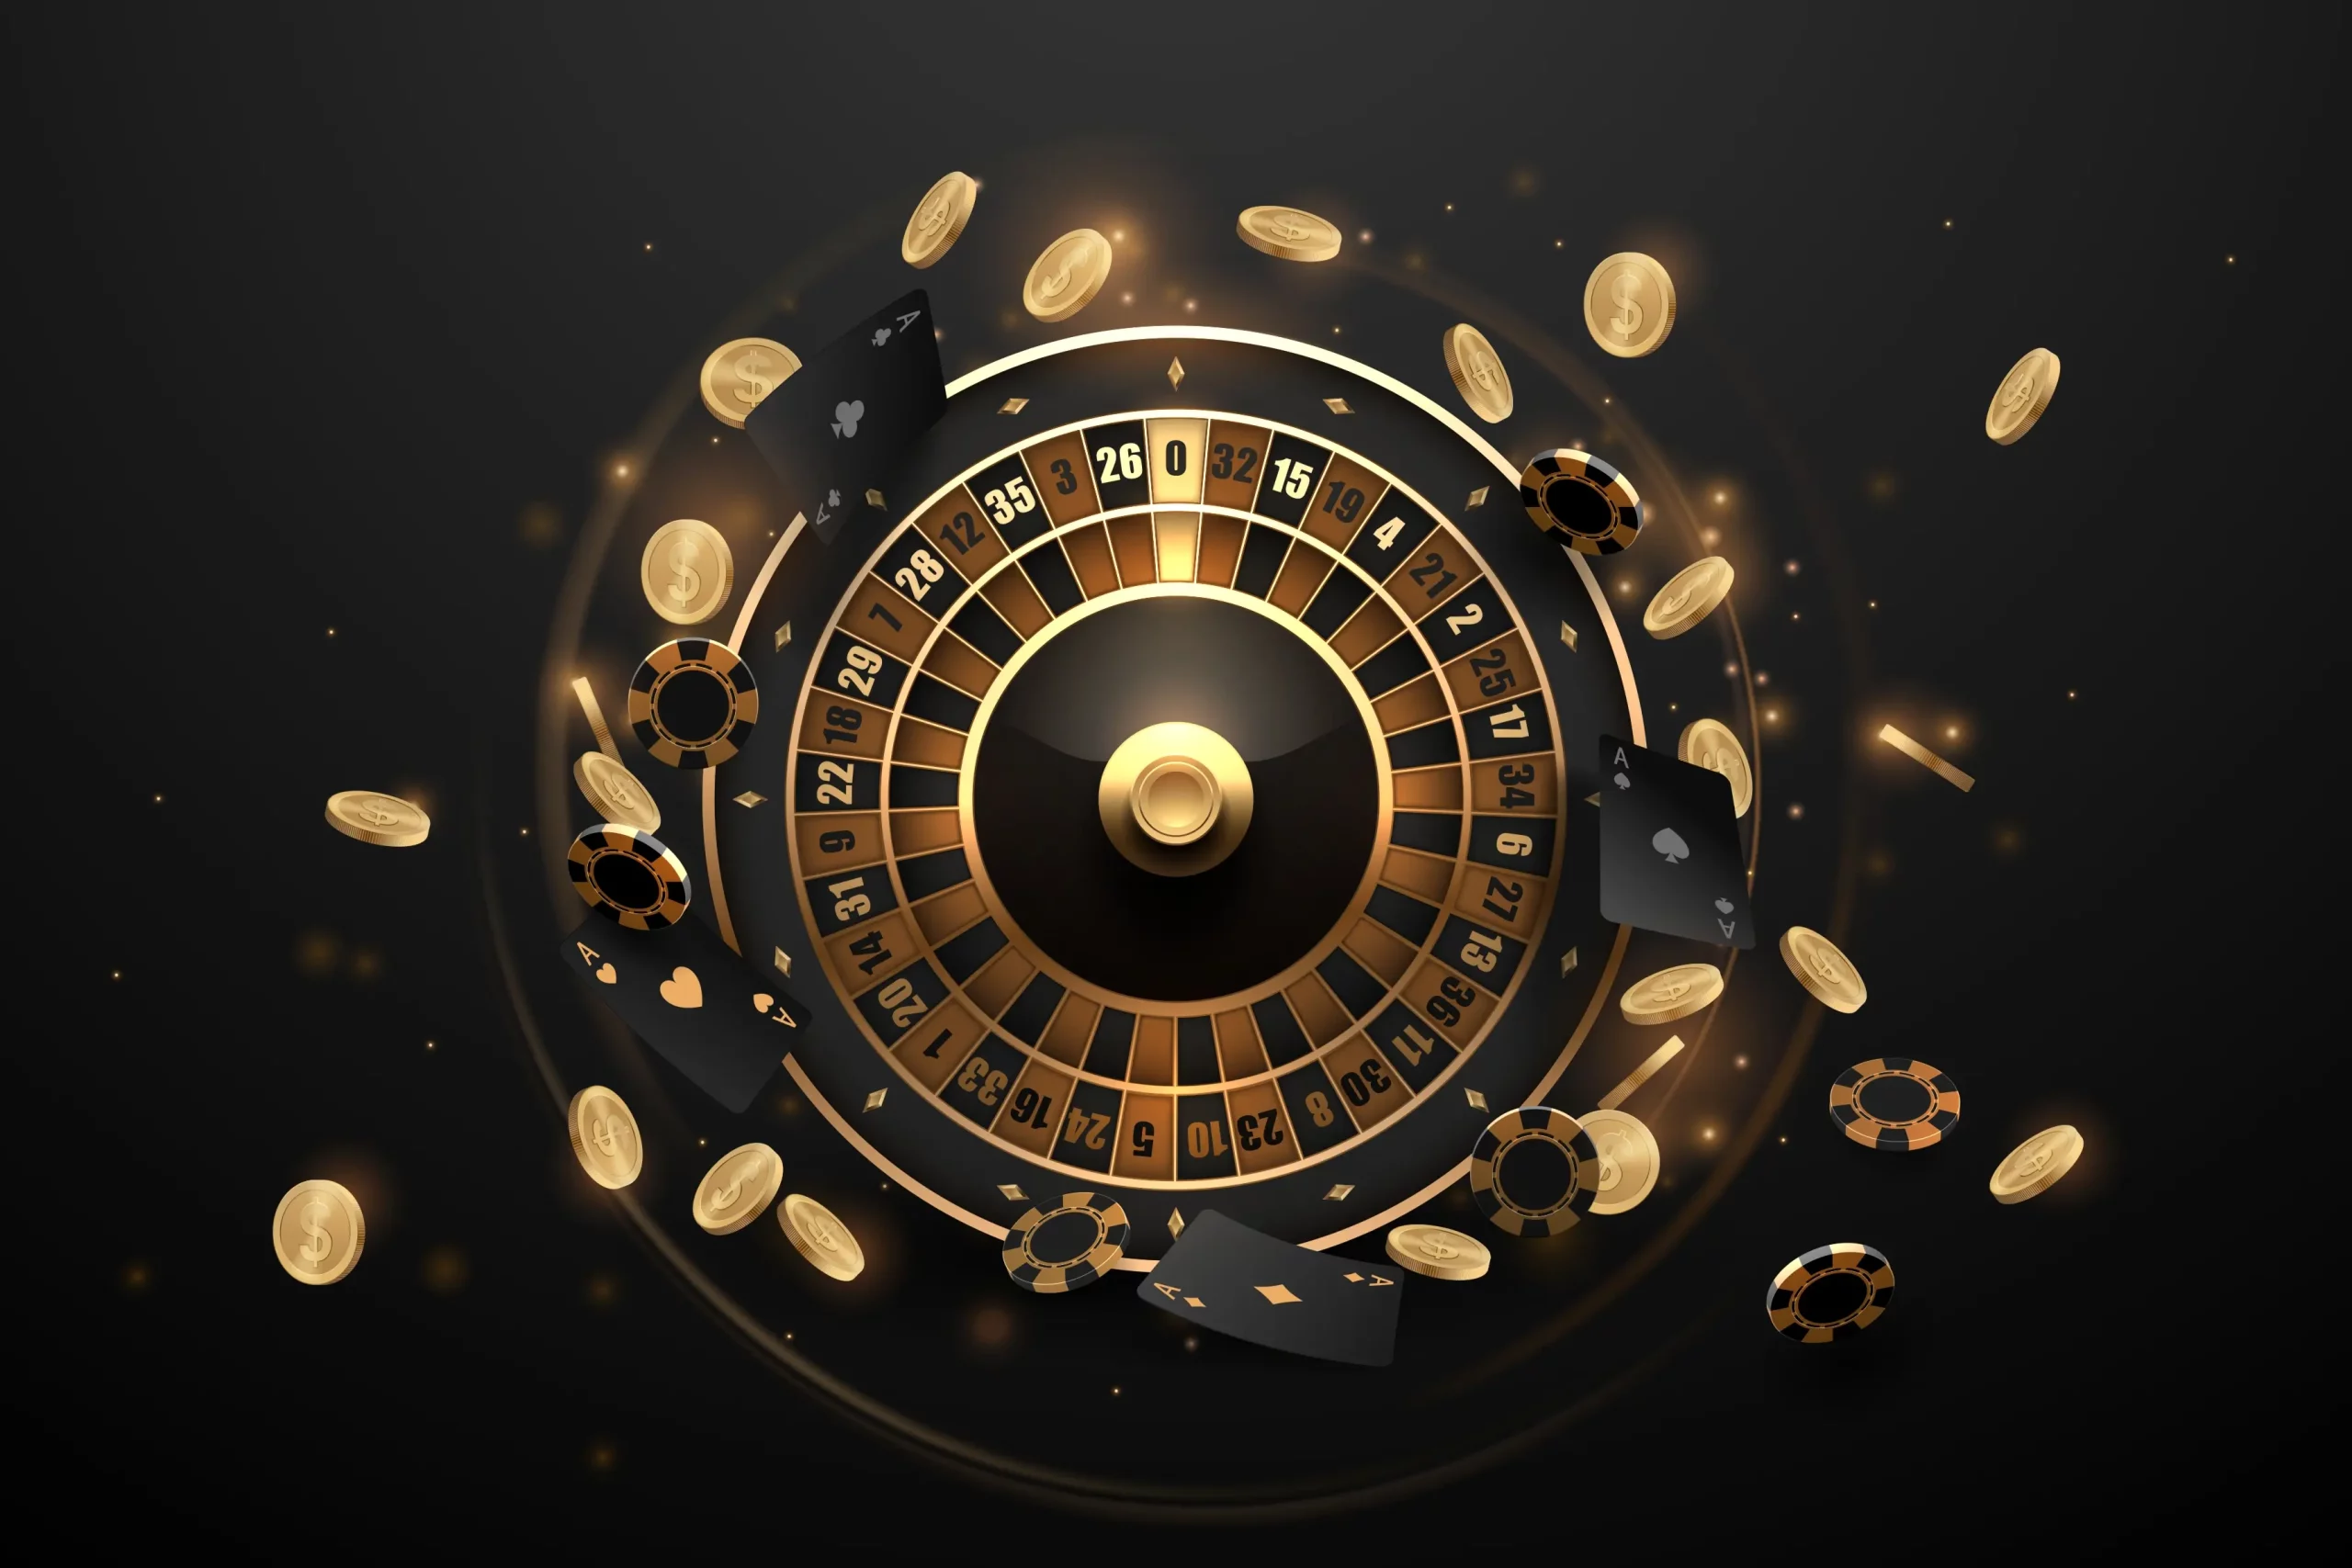 How to play roulette: Rules for beginners